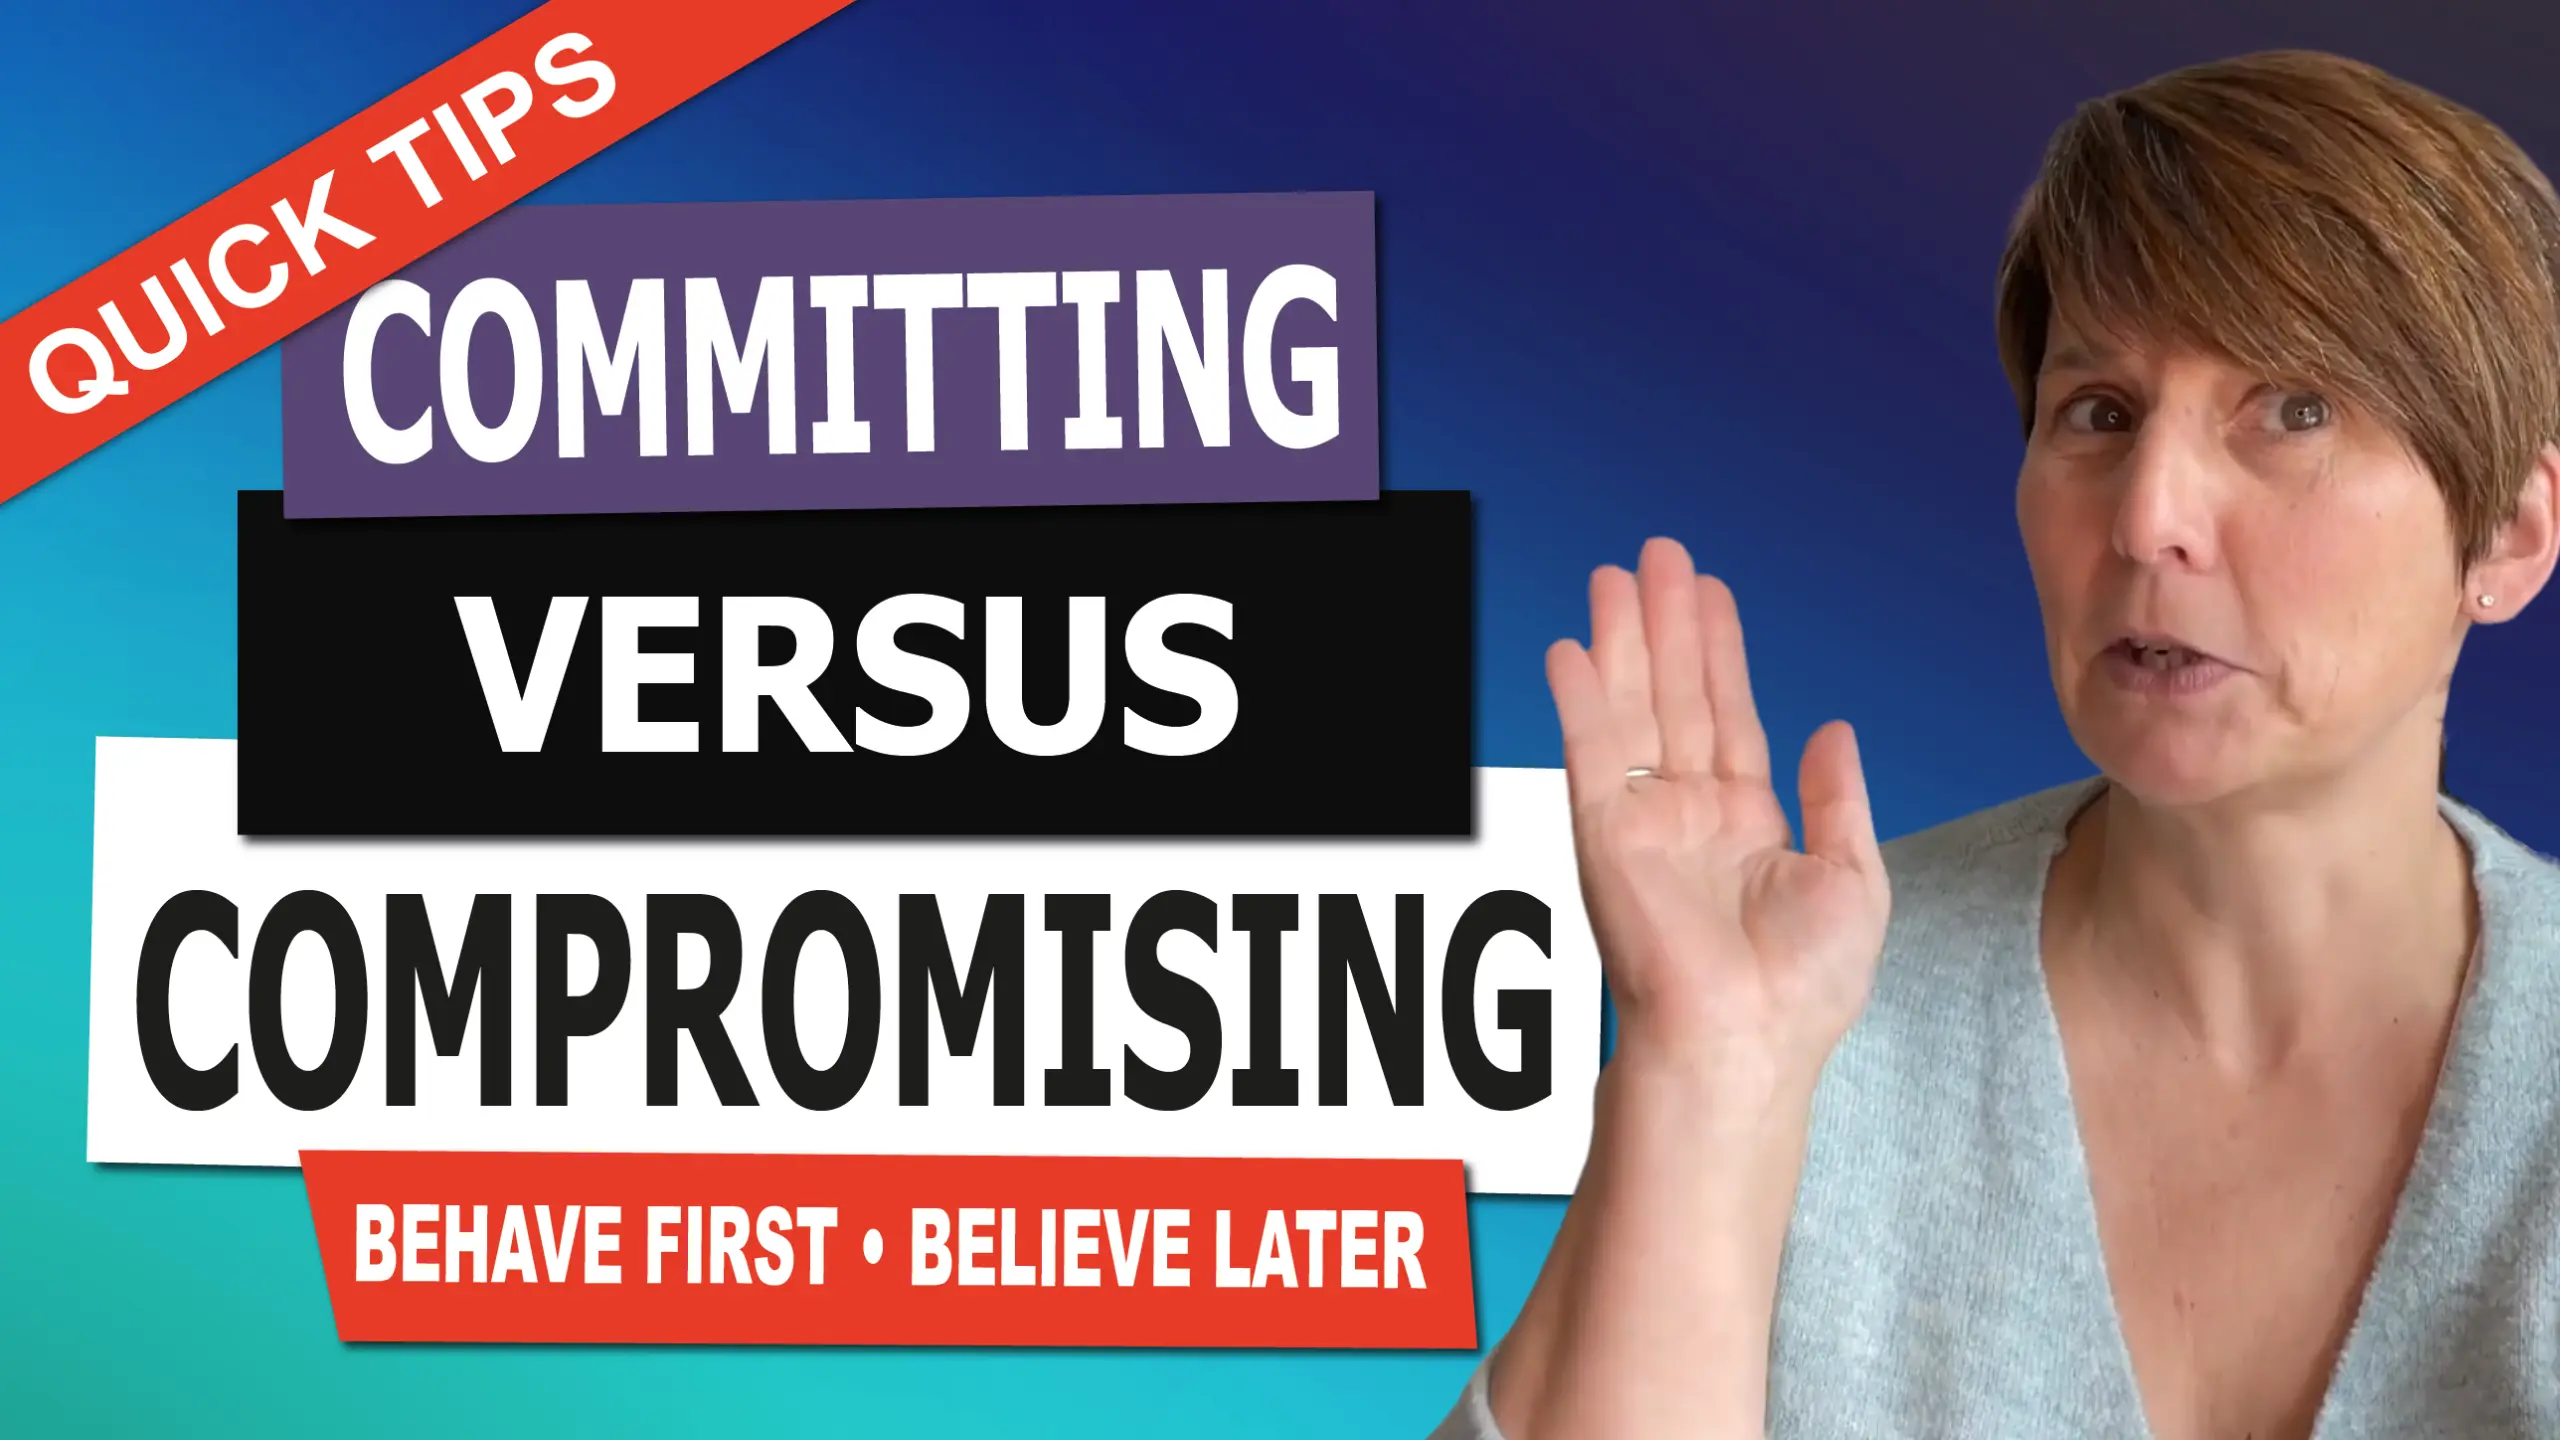 Committing Versus Compromising with Liane Davey